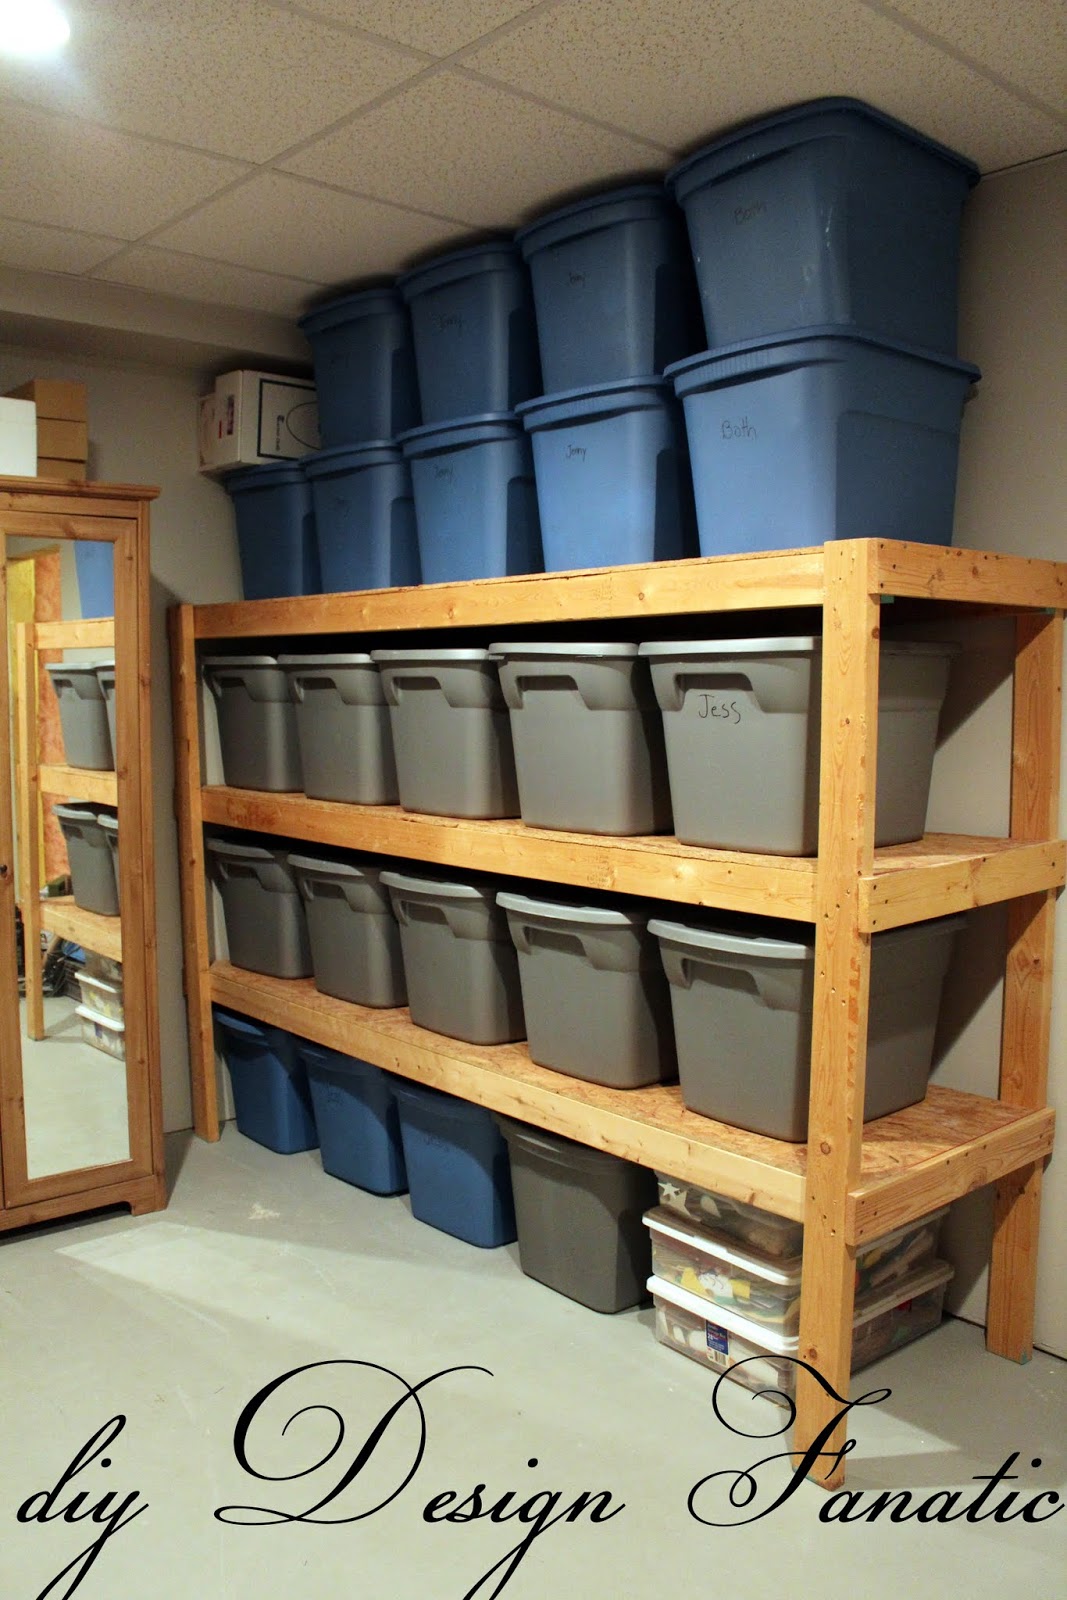 6 ways to add more storage to your home.